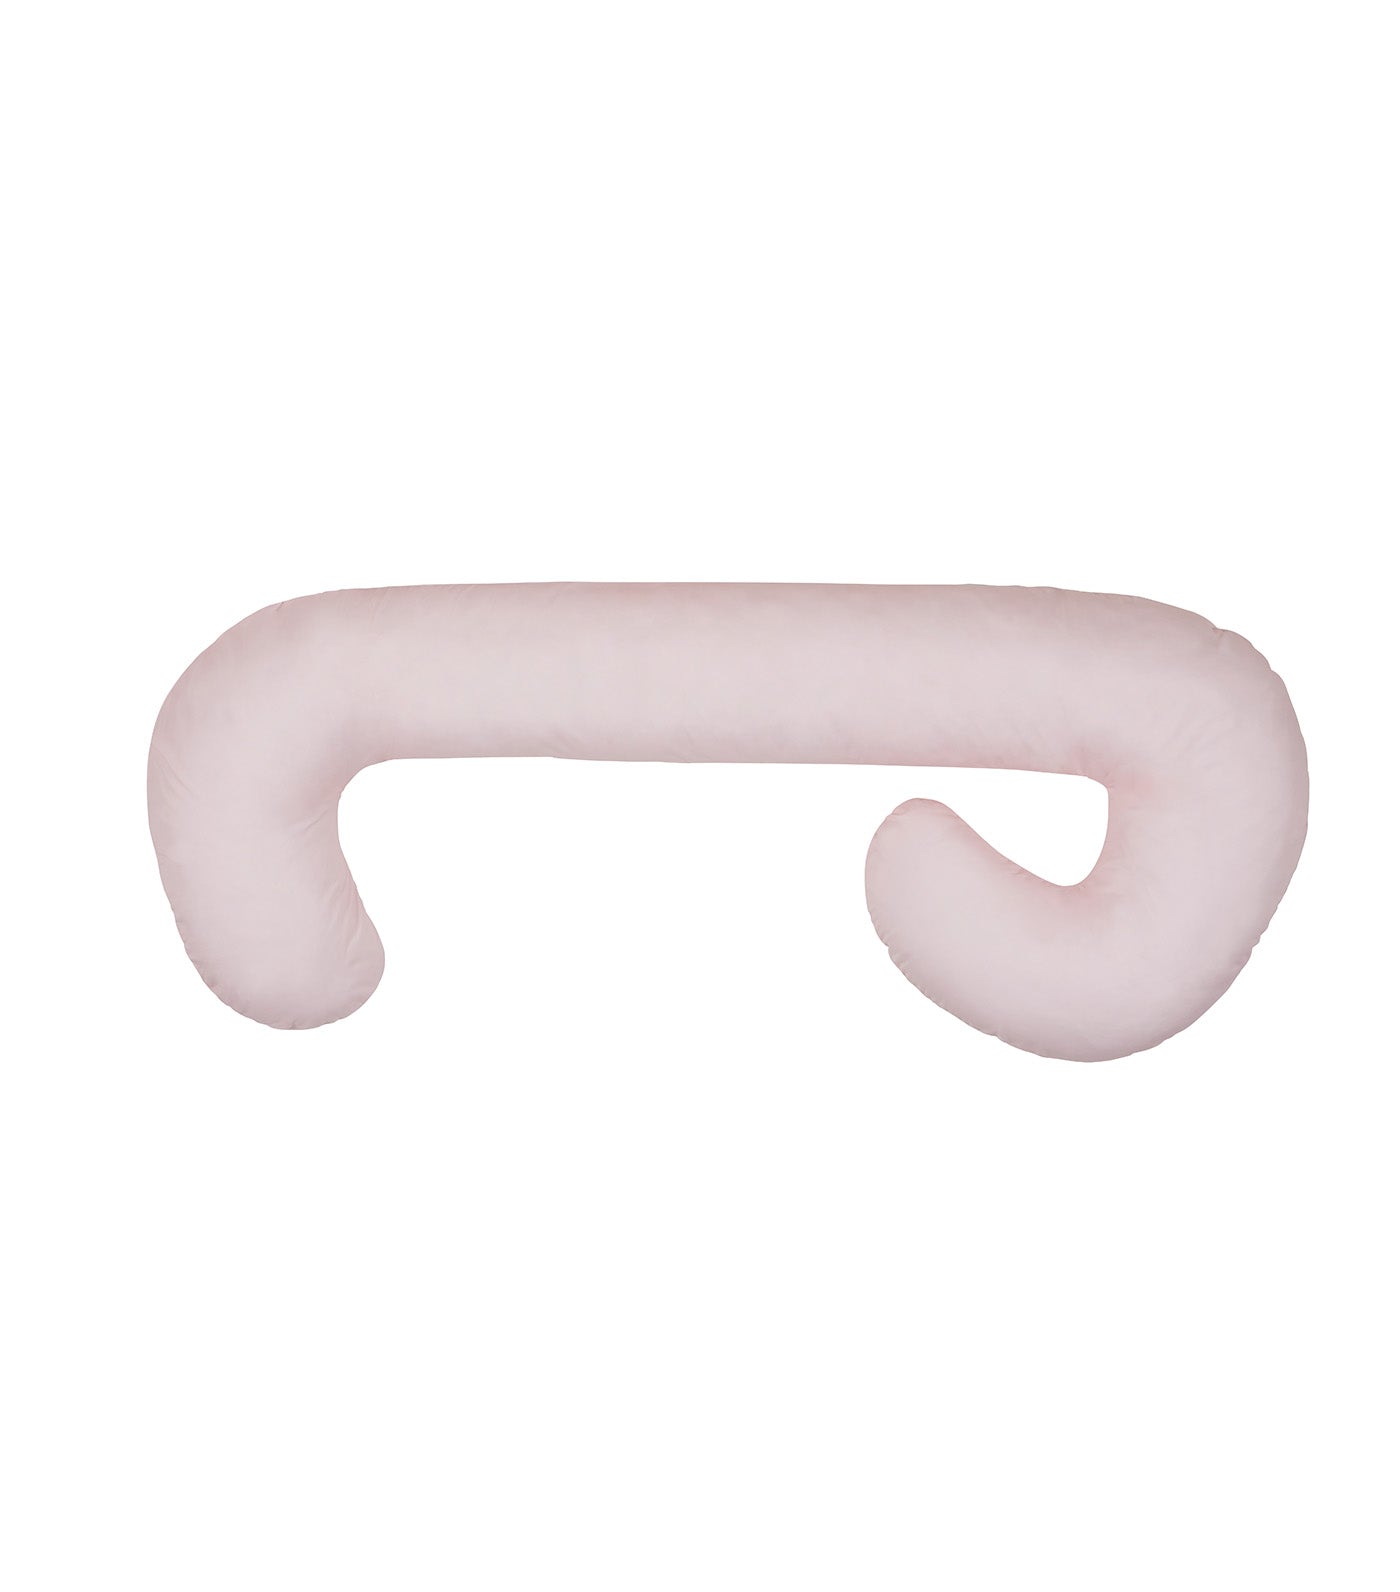 Body Pillow - Pink Solid